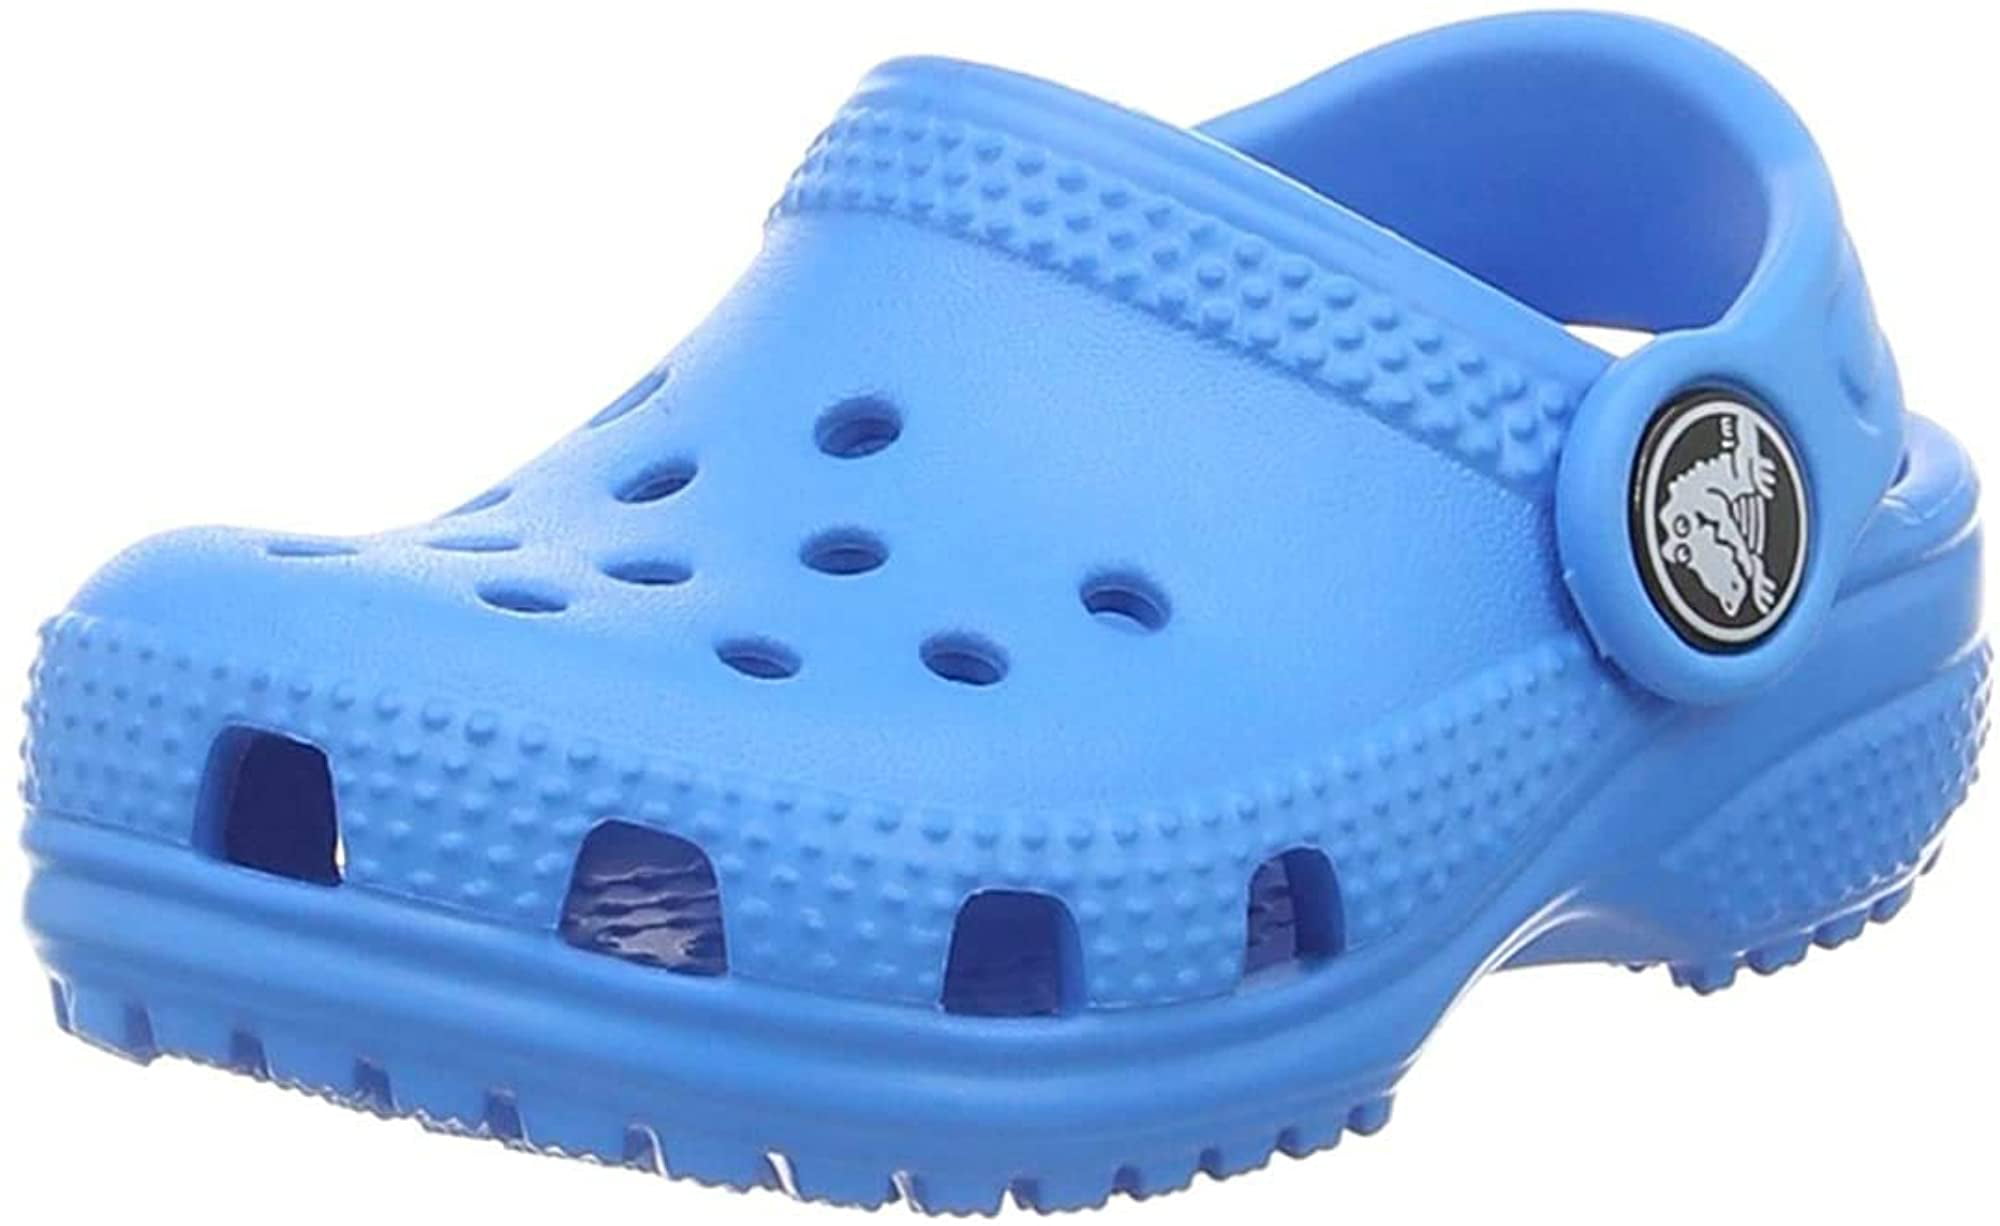 CROC Kids Classic Slide Sandal Slip on Water Shoes for Toddlers 